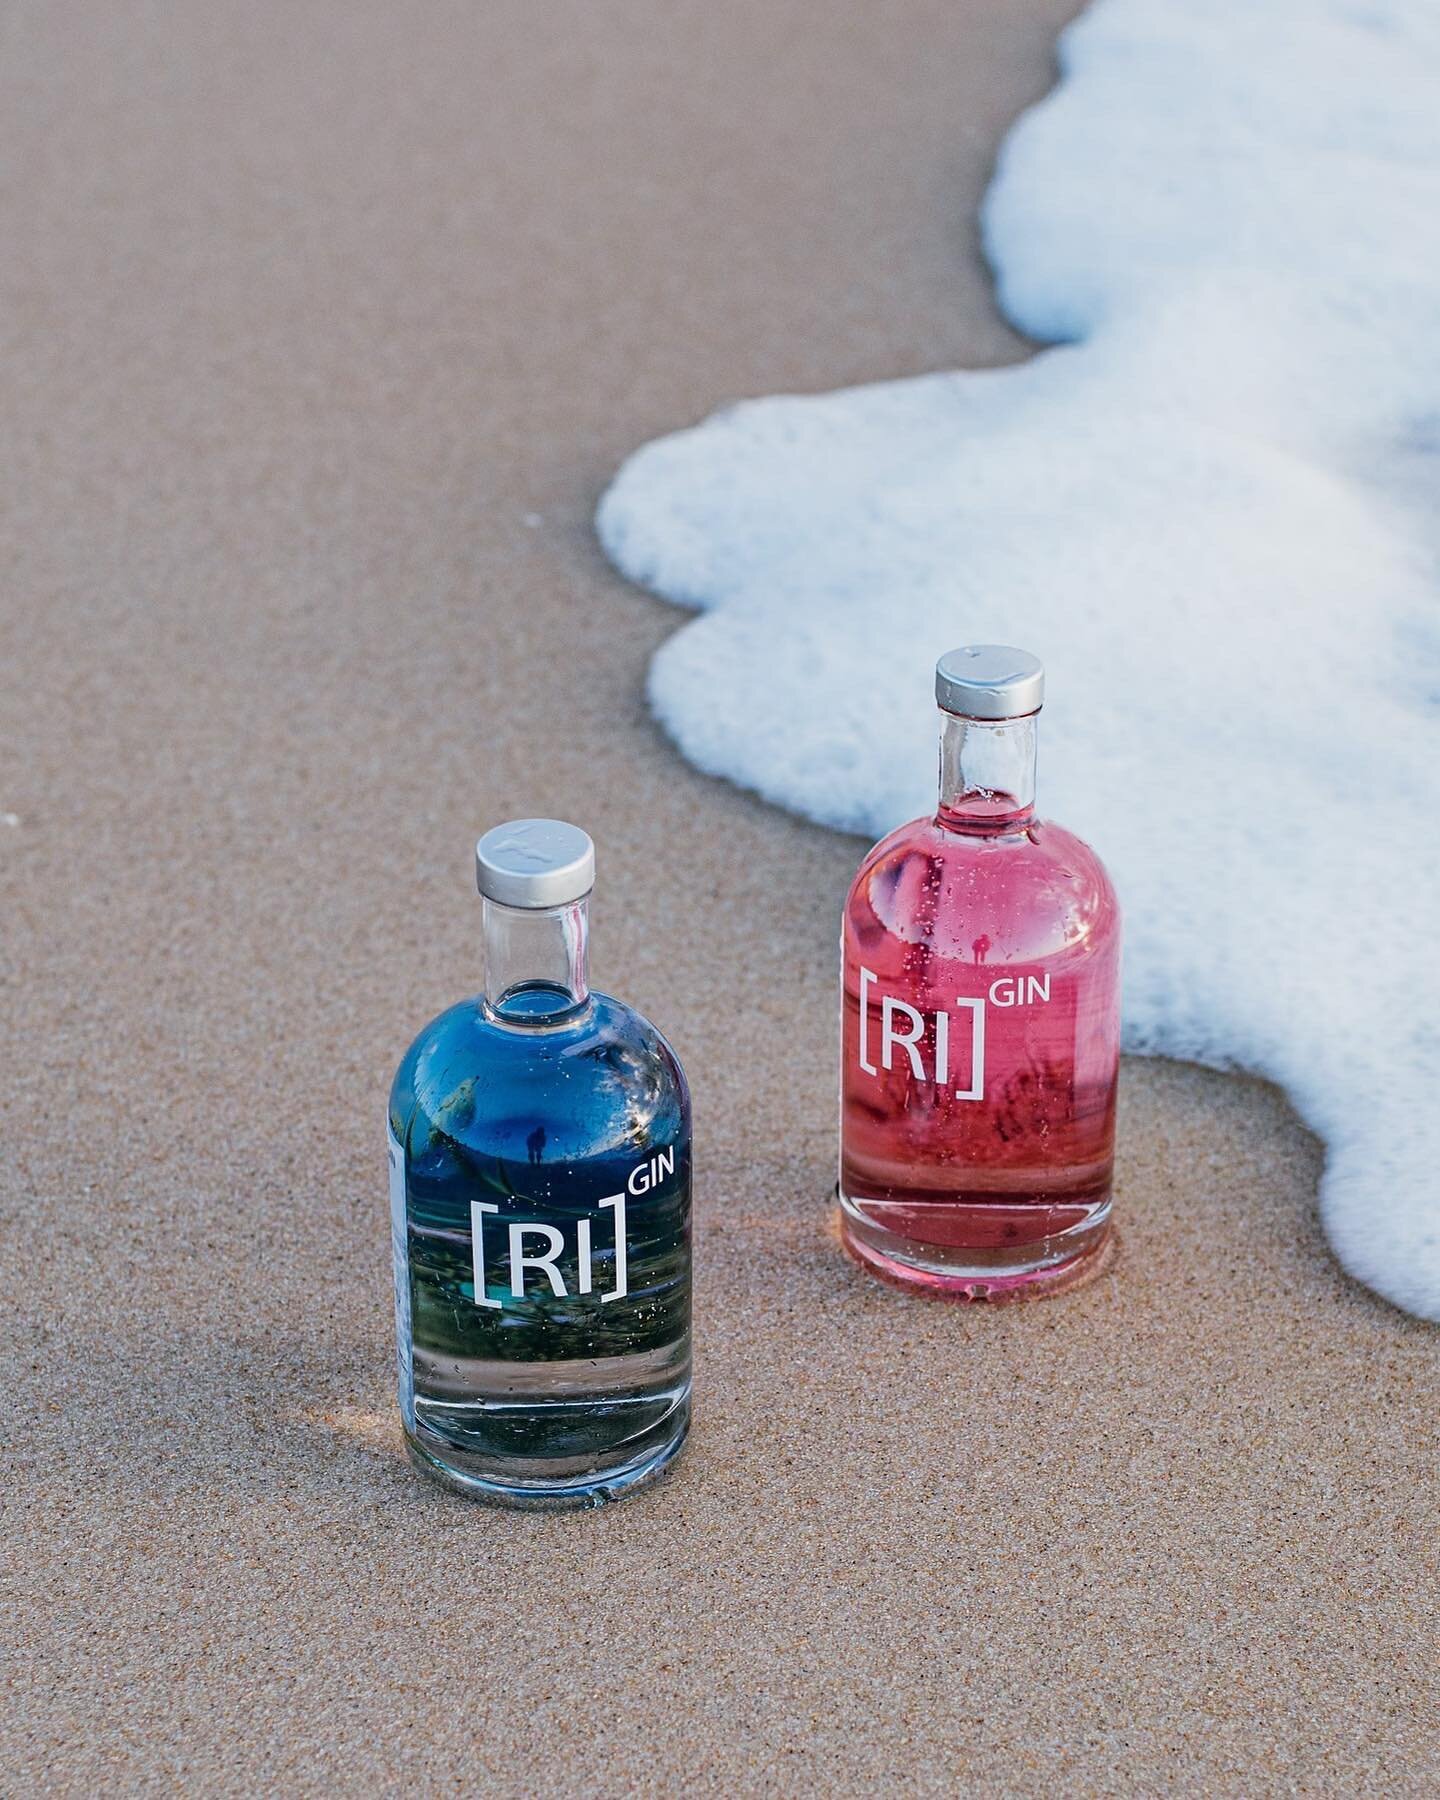 The taste of Rottnest&hellip; 

Available at @the_wine_thief @rottnestgeneralstore and online:

https://therottnestislandgin.com

#rottnestislandgin 
#thewinethief